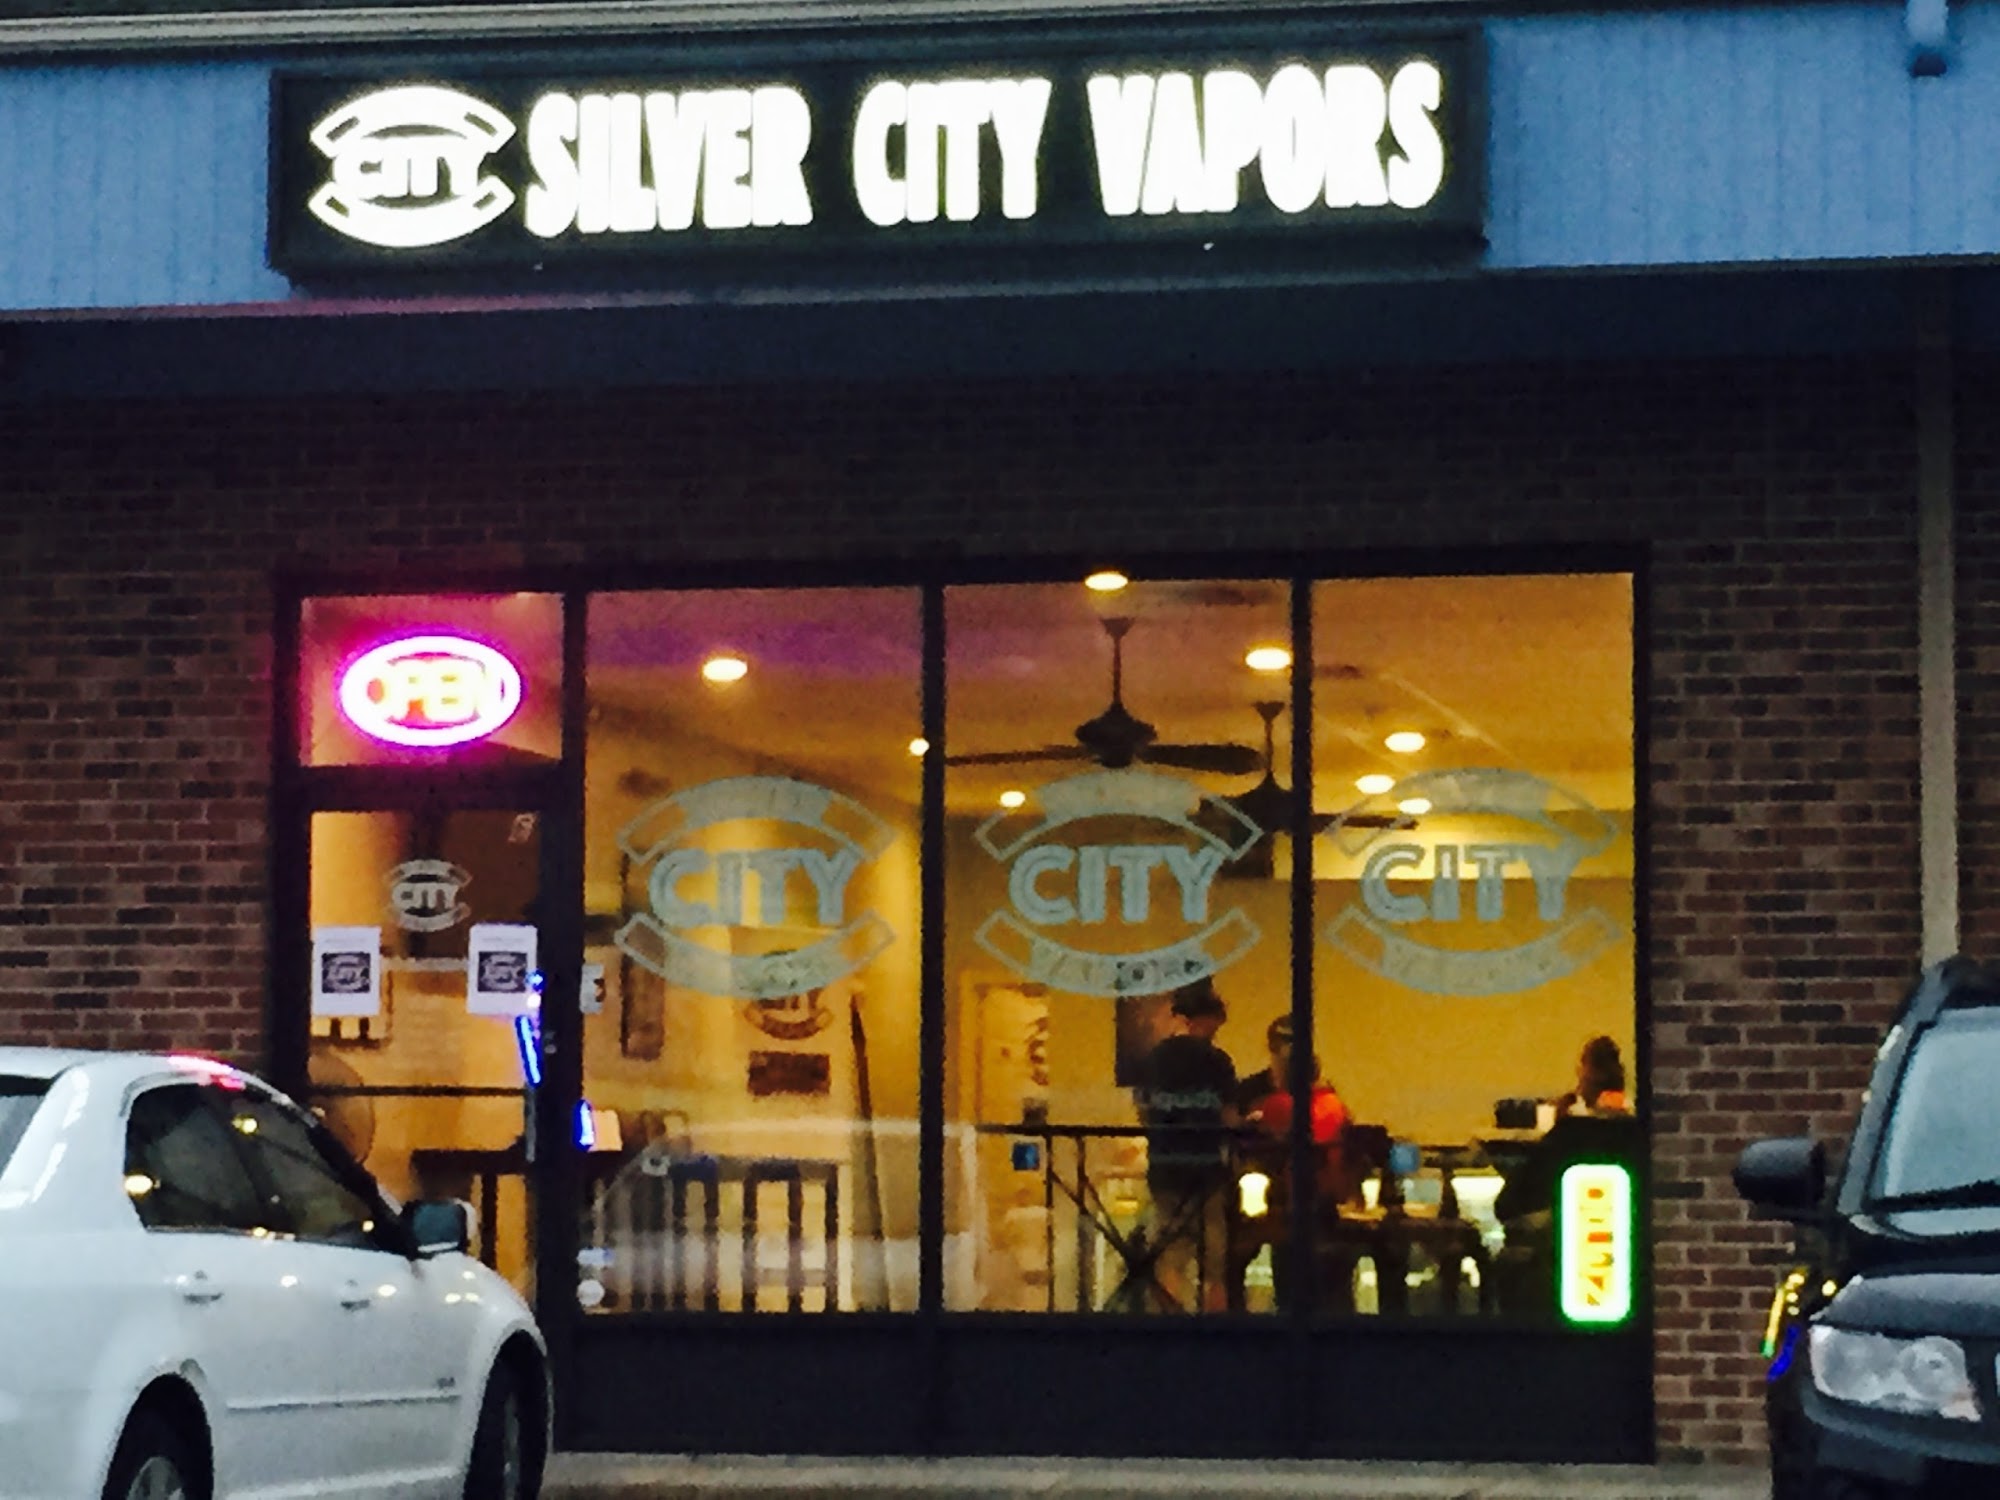 Silver City Vapors in Southington, CT